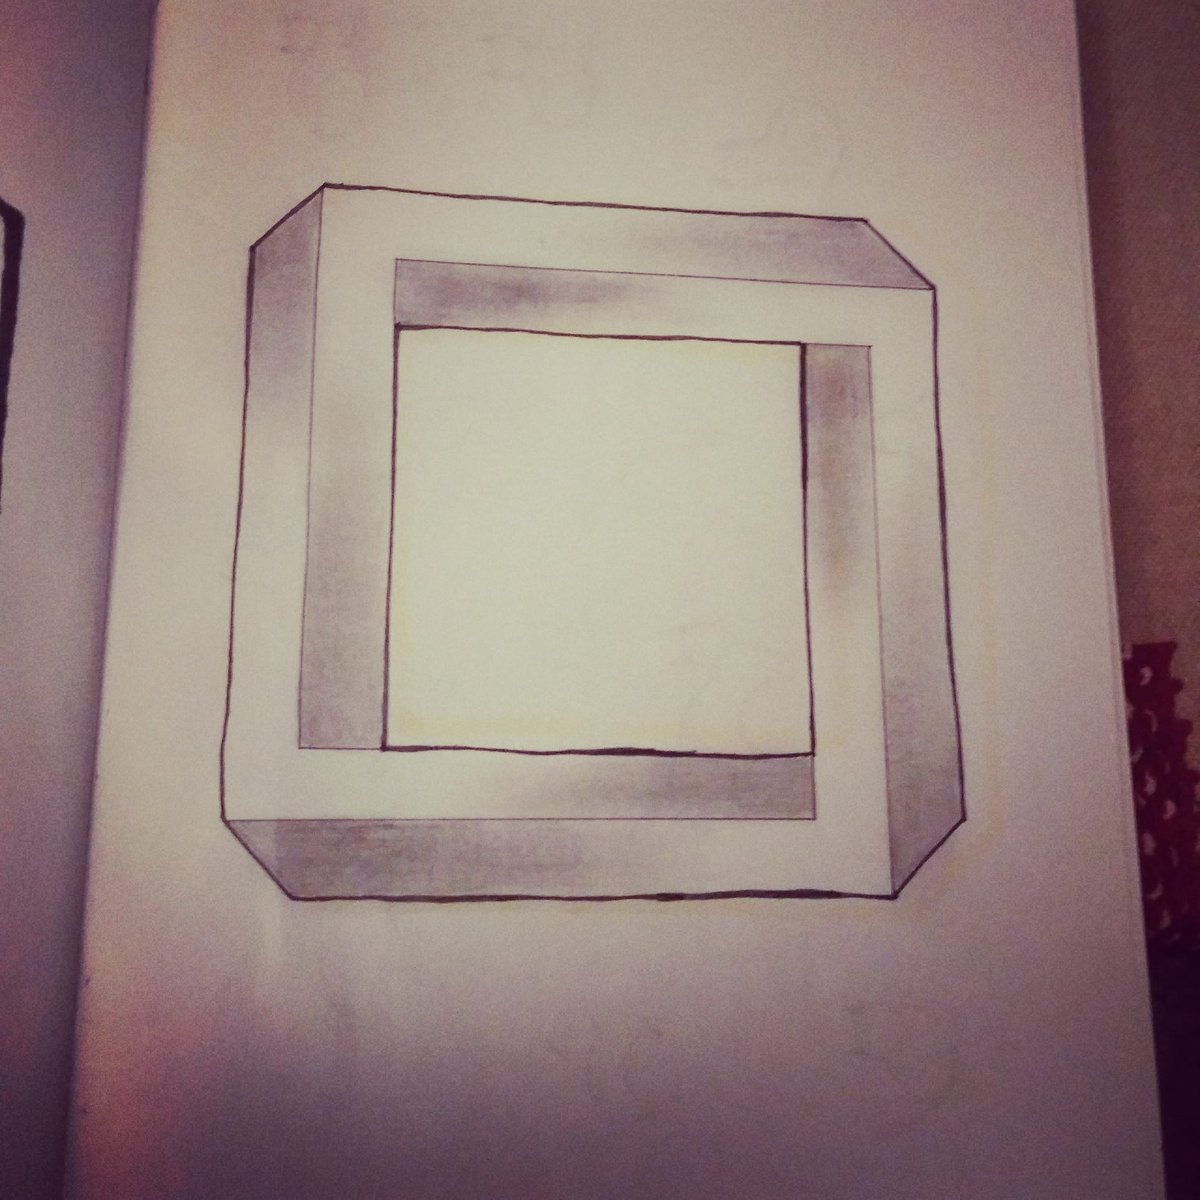 Impossible square

#impossibleshape  #impossibledrawing #impossiblesquare #opticalillusion #3deffect #3dsketch #3ddrawing #sketch #sketchbook #pencilsketch #pencildrawing #drawing #pencilonpeper #square #blackcatdraws